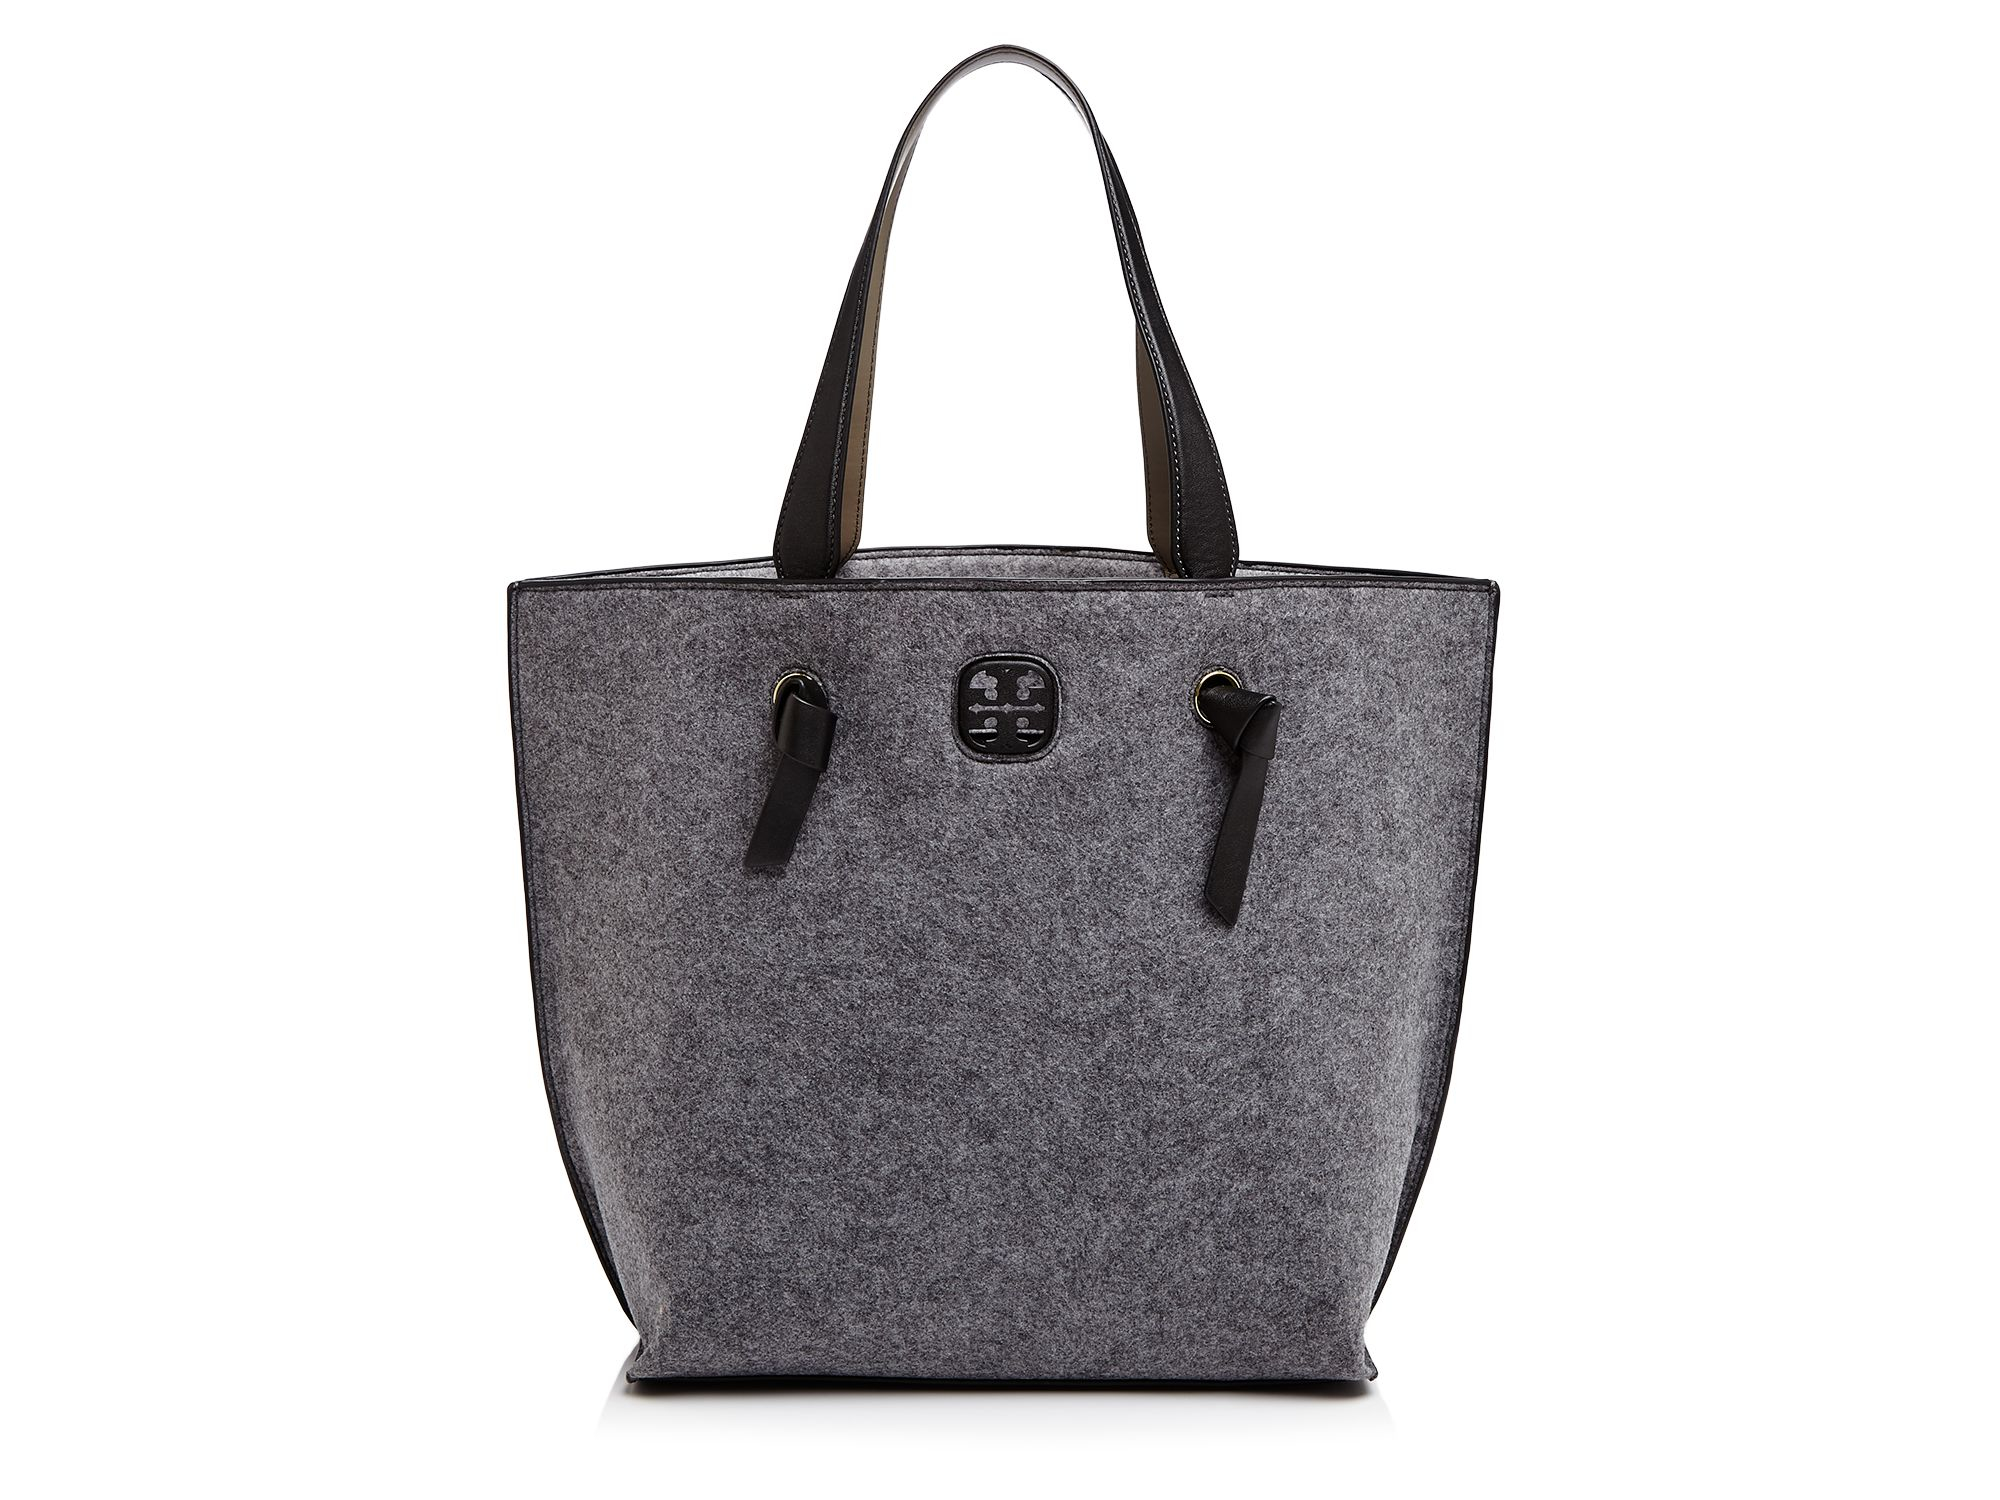 Tory Burch Color Block Felt Tote in Charcoal/Light Gray (Gray) - Lyst